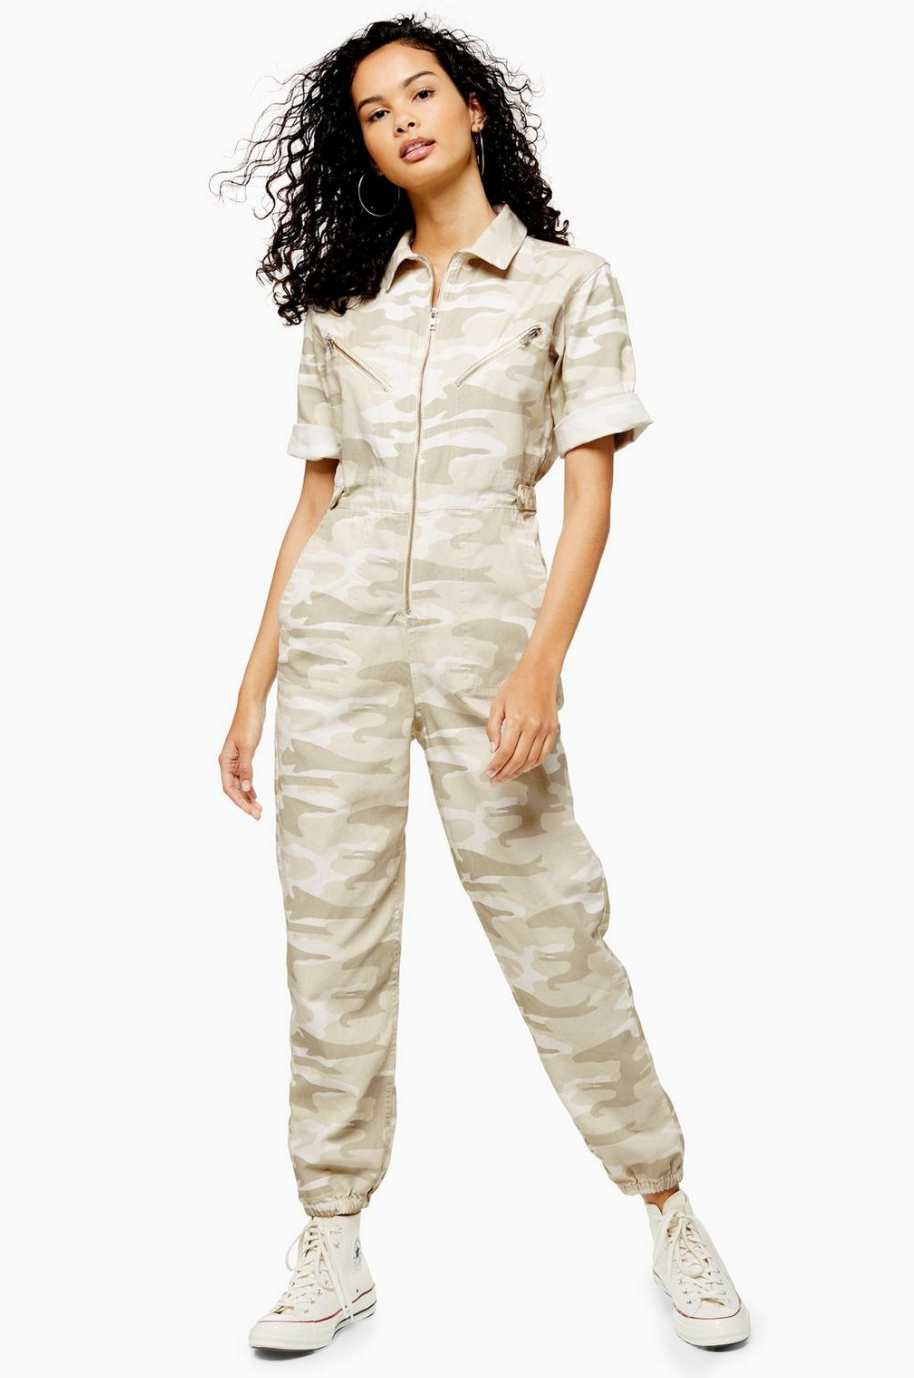 What I Screenshot: The Utility Jumpsuit That's Equal Parts Chic and Cool